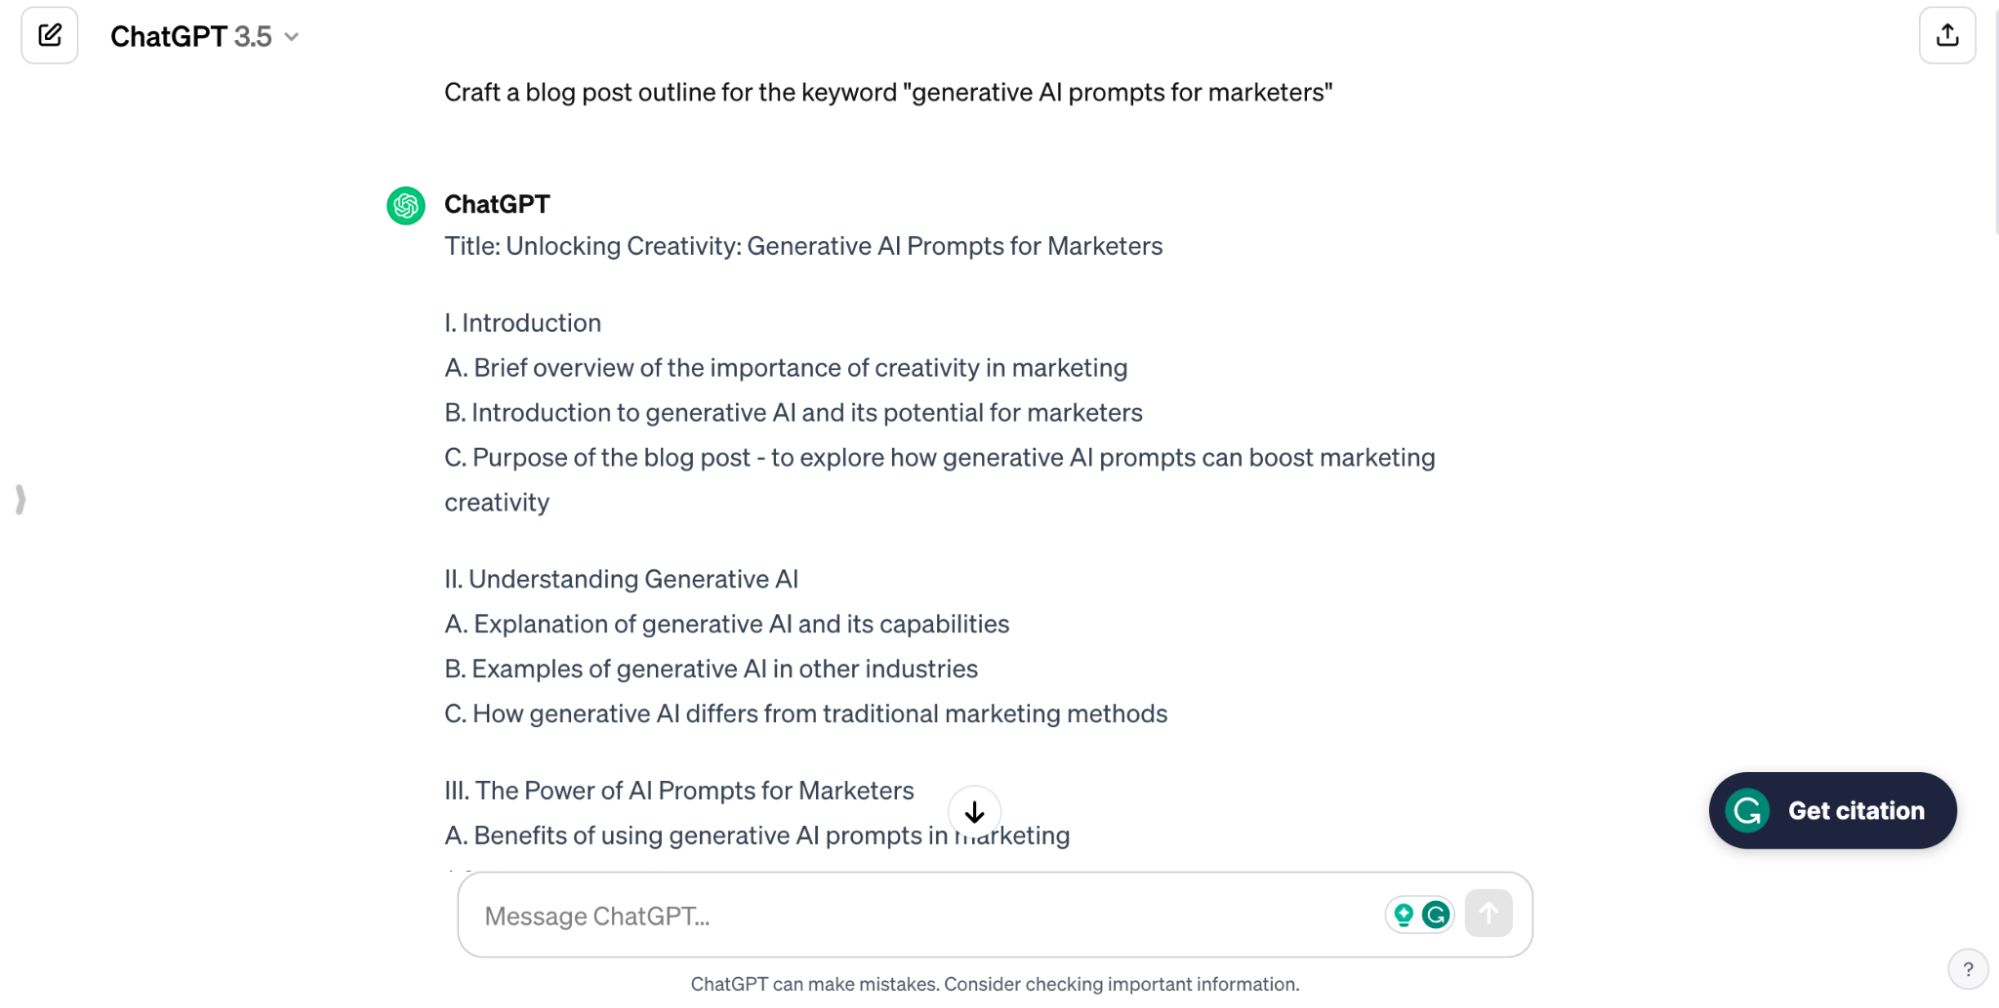 AI tools like ChatGPT can save marketers time by generating outlines or draft content